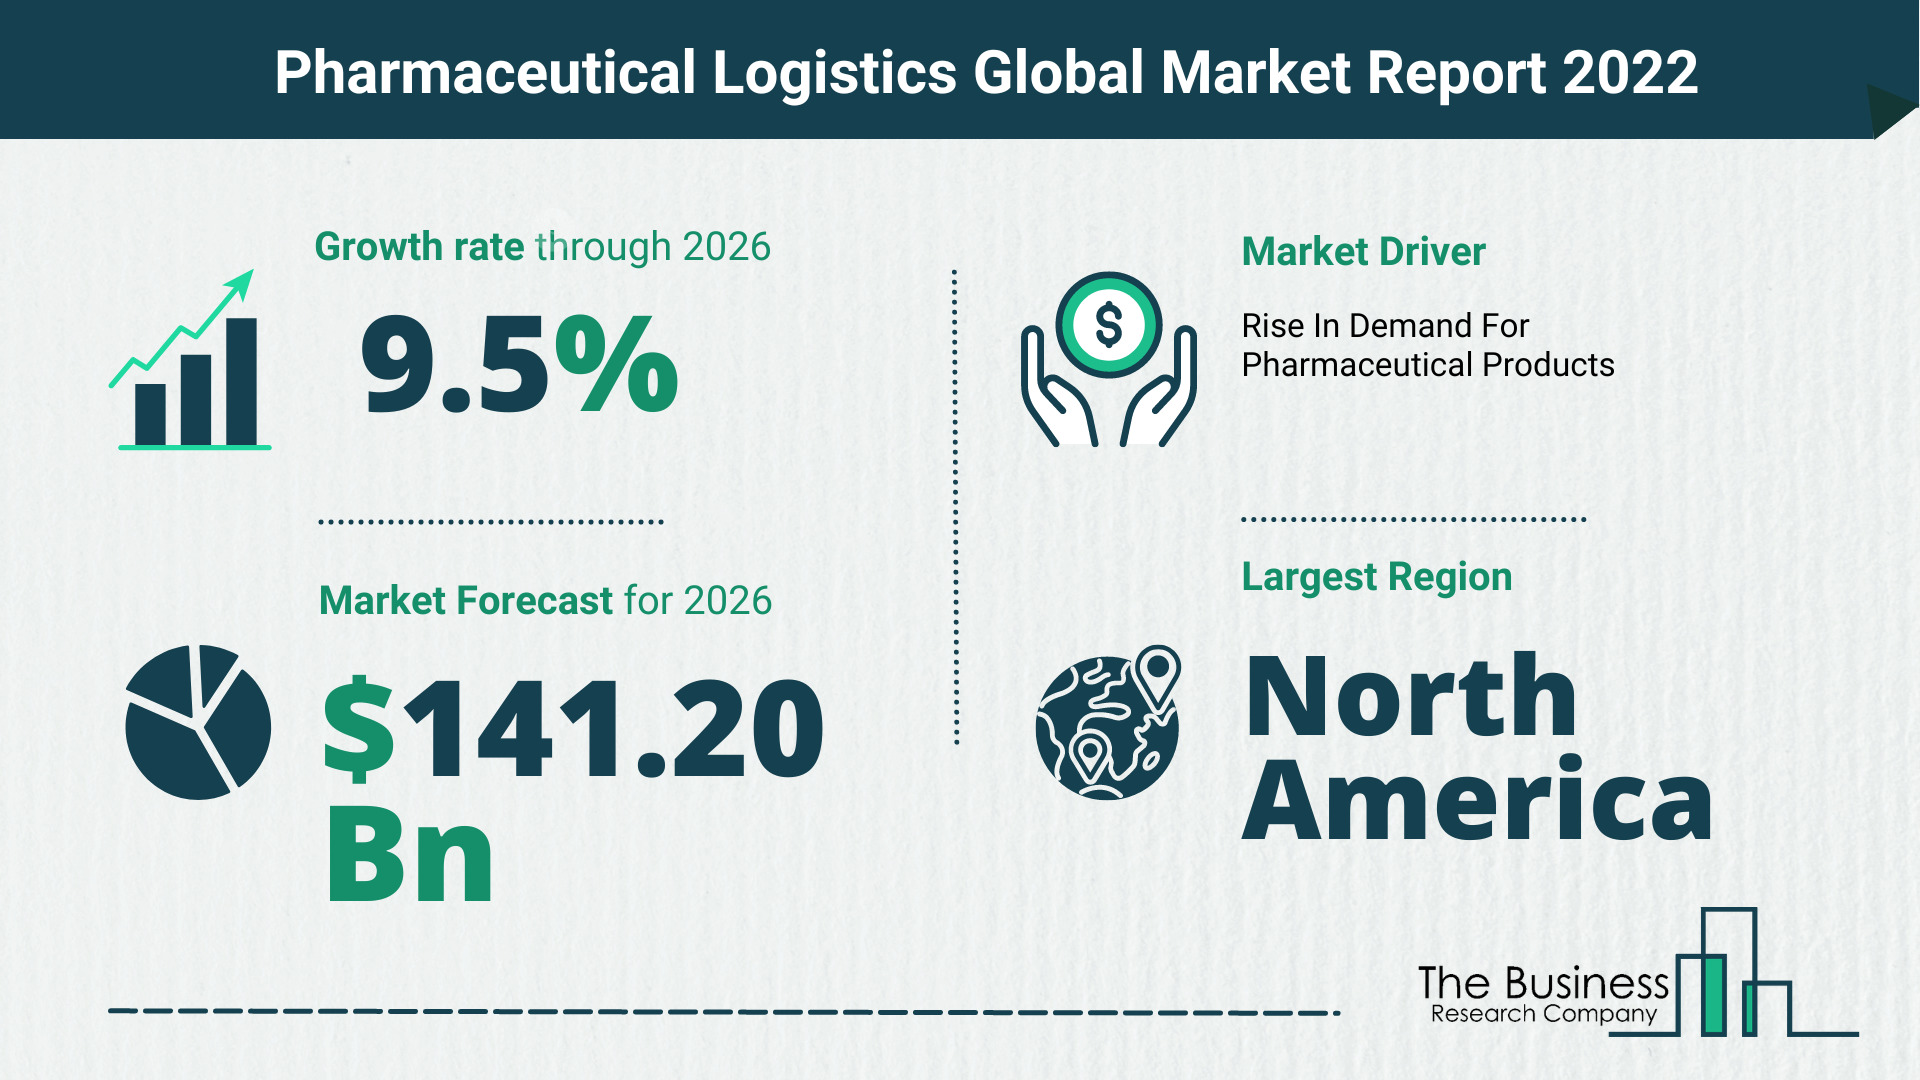 How Will The Pharmaceutical Logistics Market Grow In 2022?